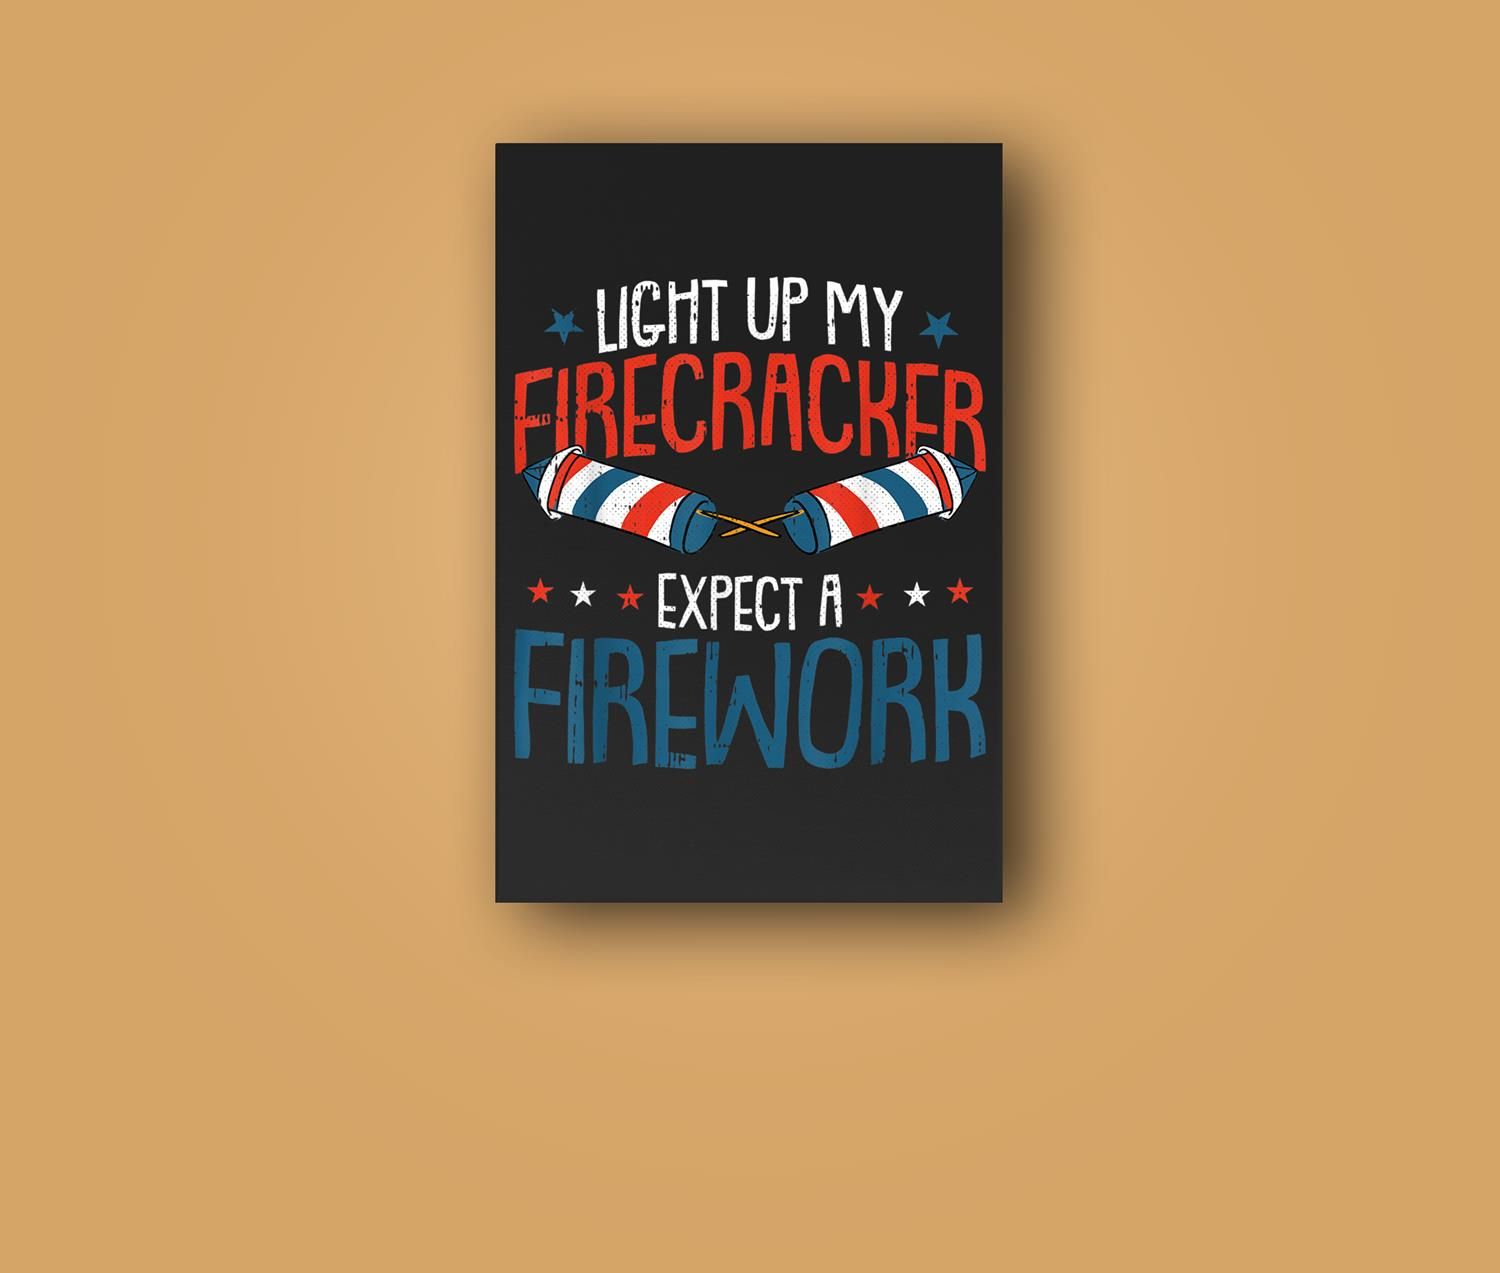 Light Up My Firecracker 4Th Of July Adult Humor Patriotic Wall Art Canvas